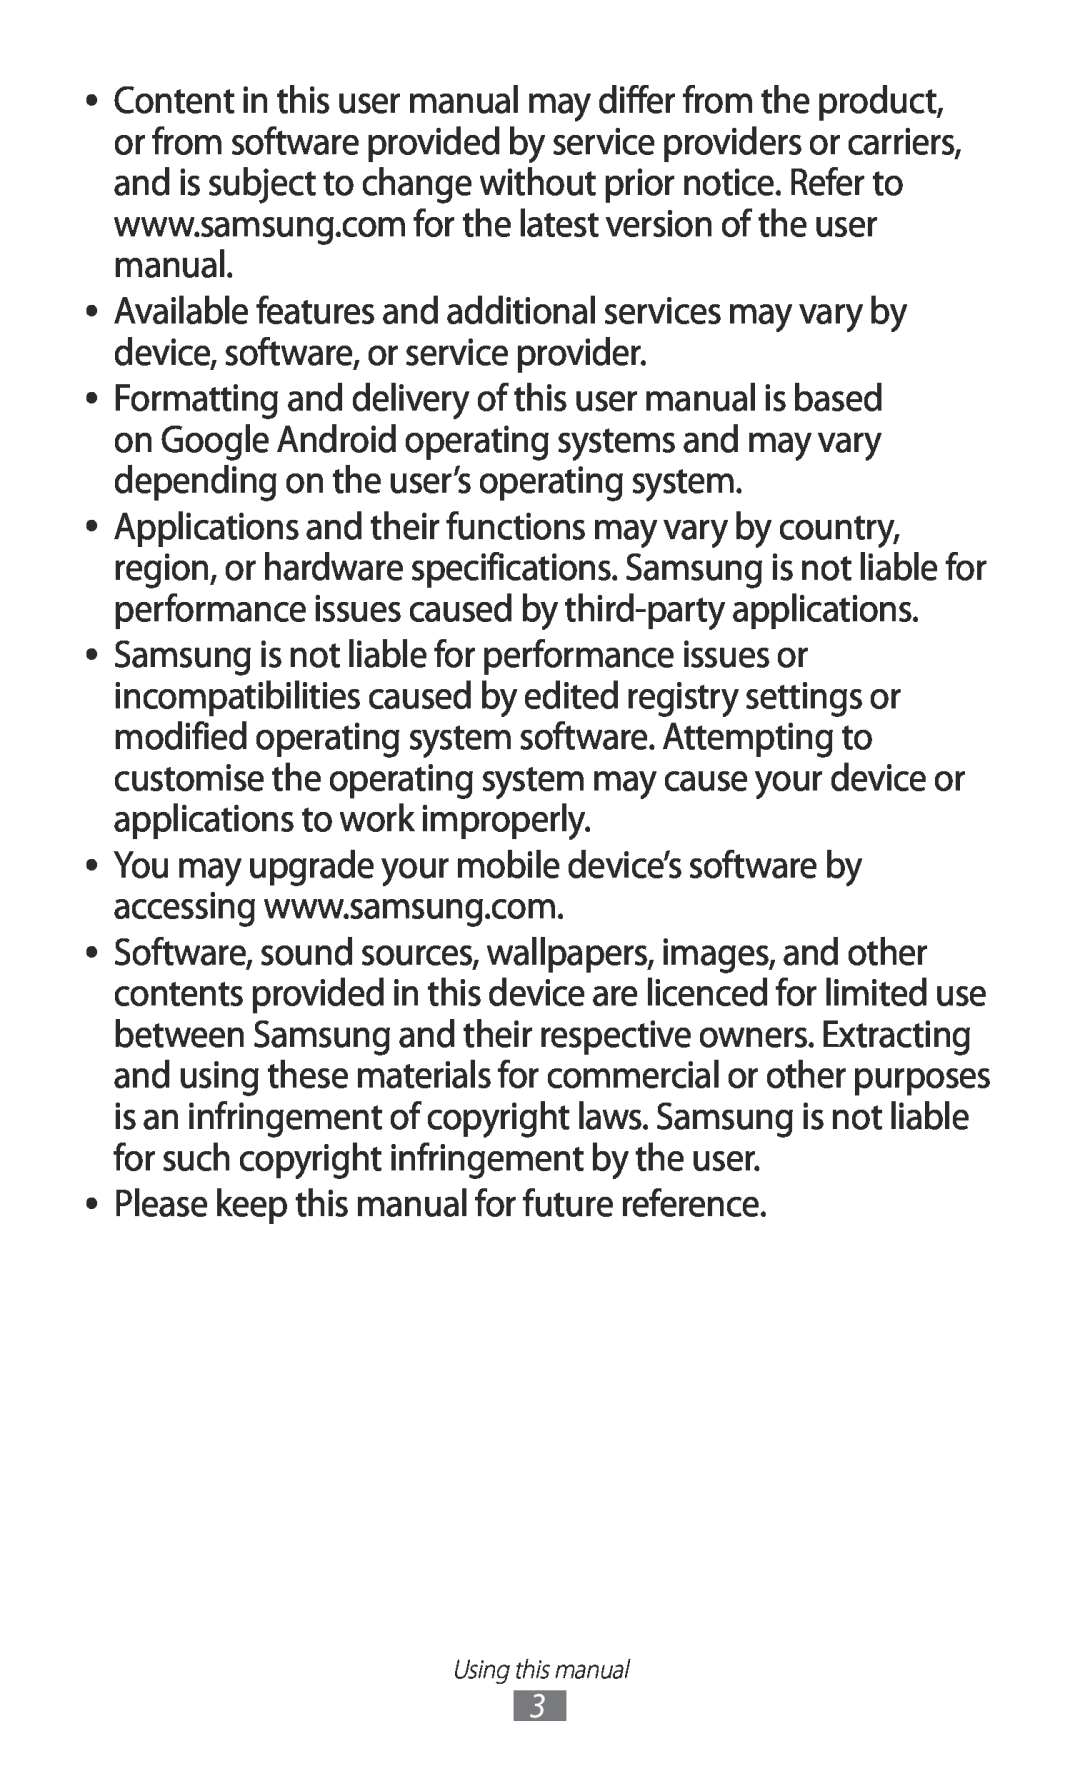 Samsung GT-I9070 user manual Please keep this manual for future reference 